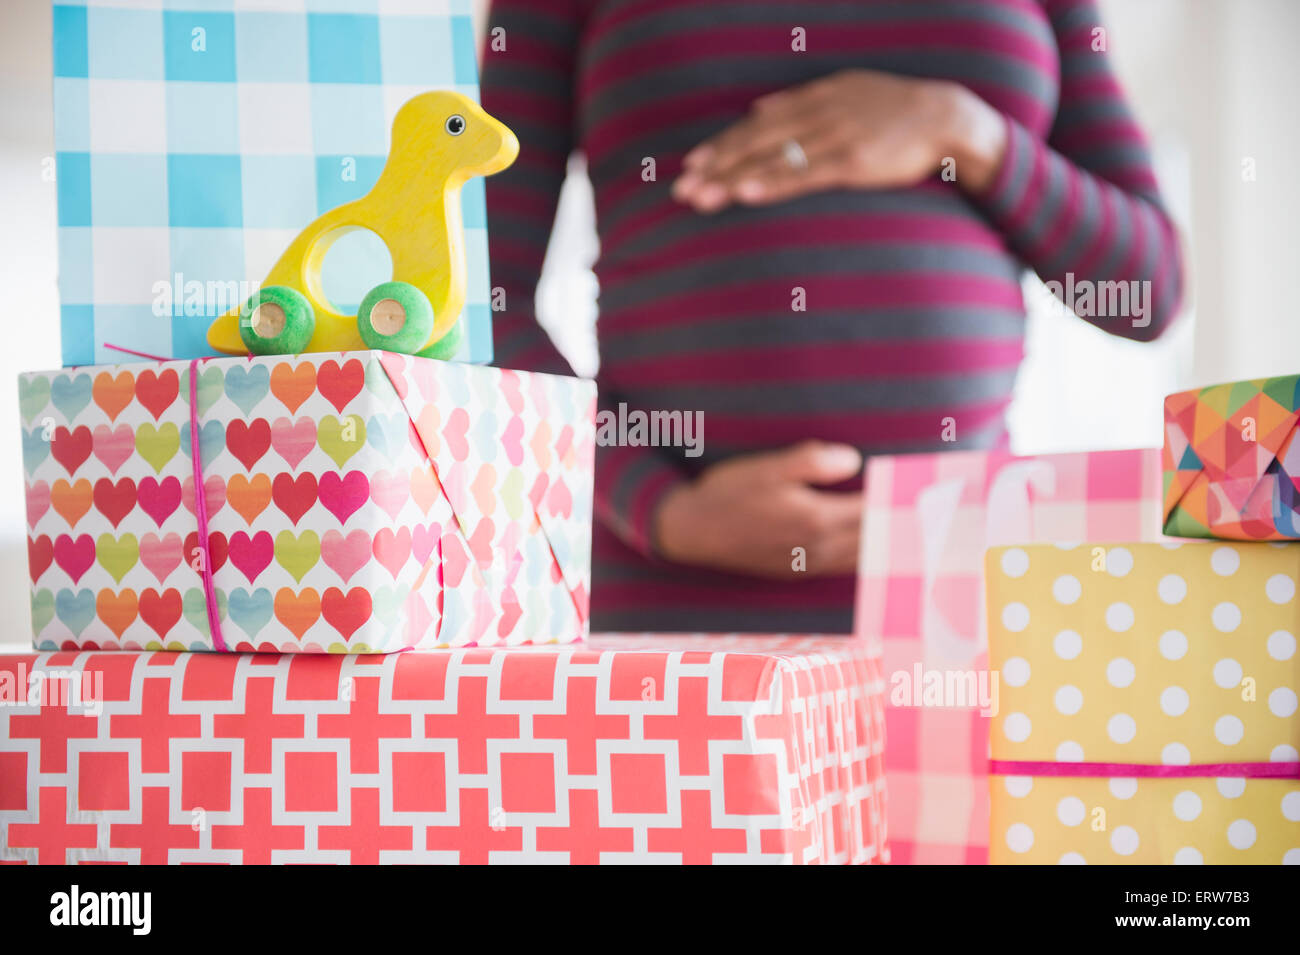 Black pregnant woman admiring gifts at baby shower Stock Photo